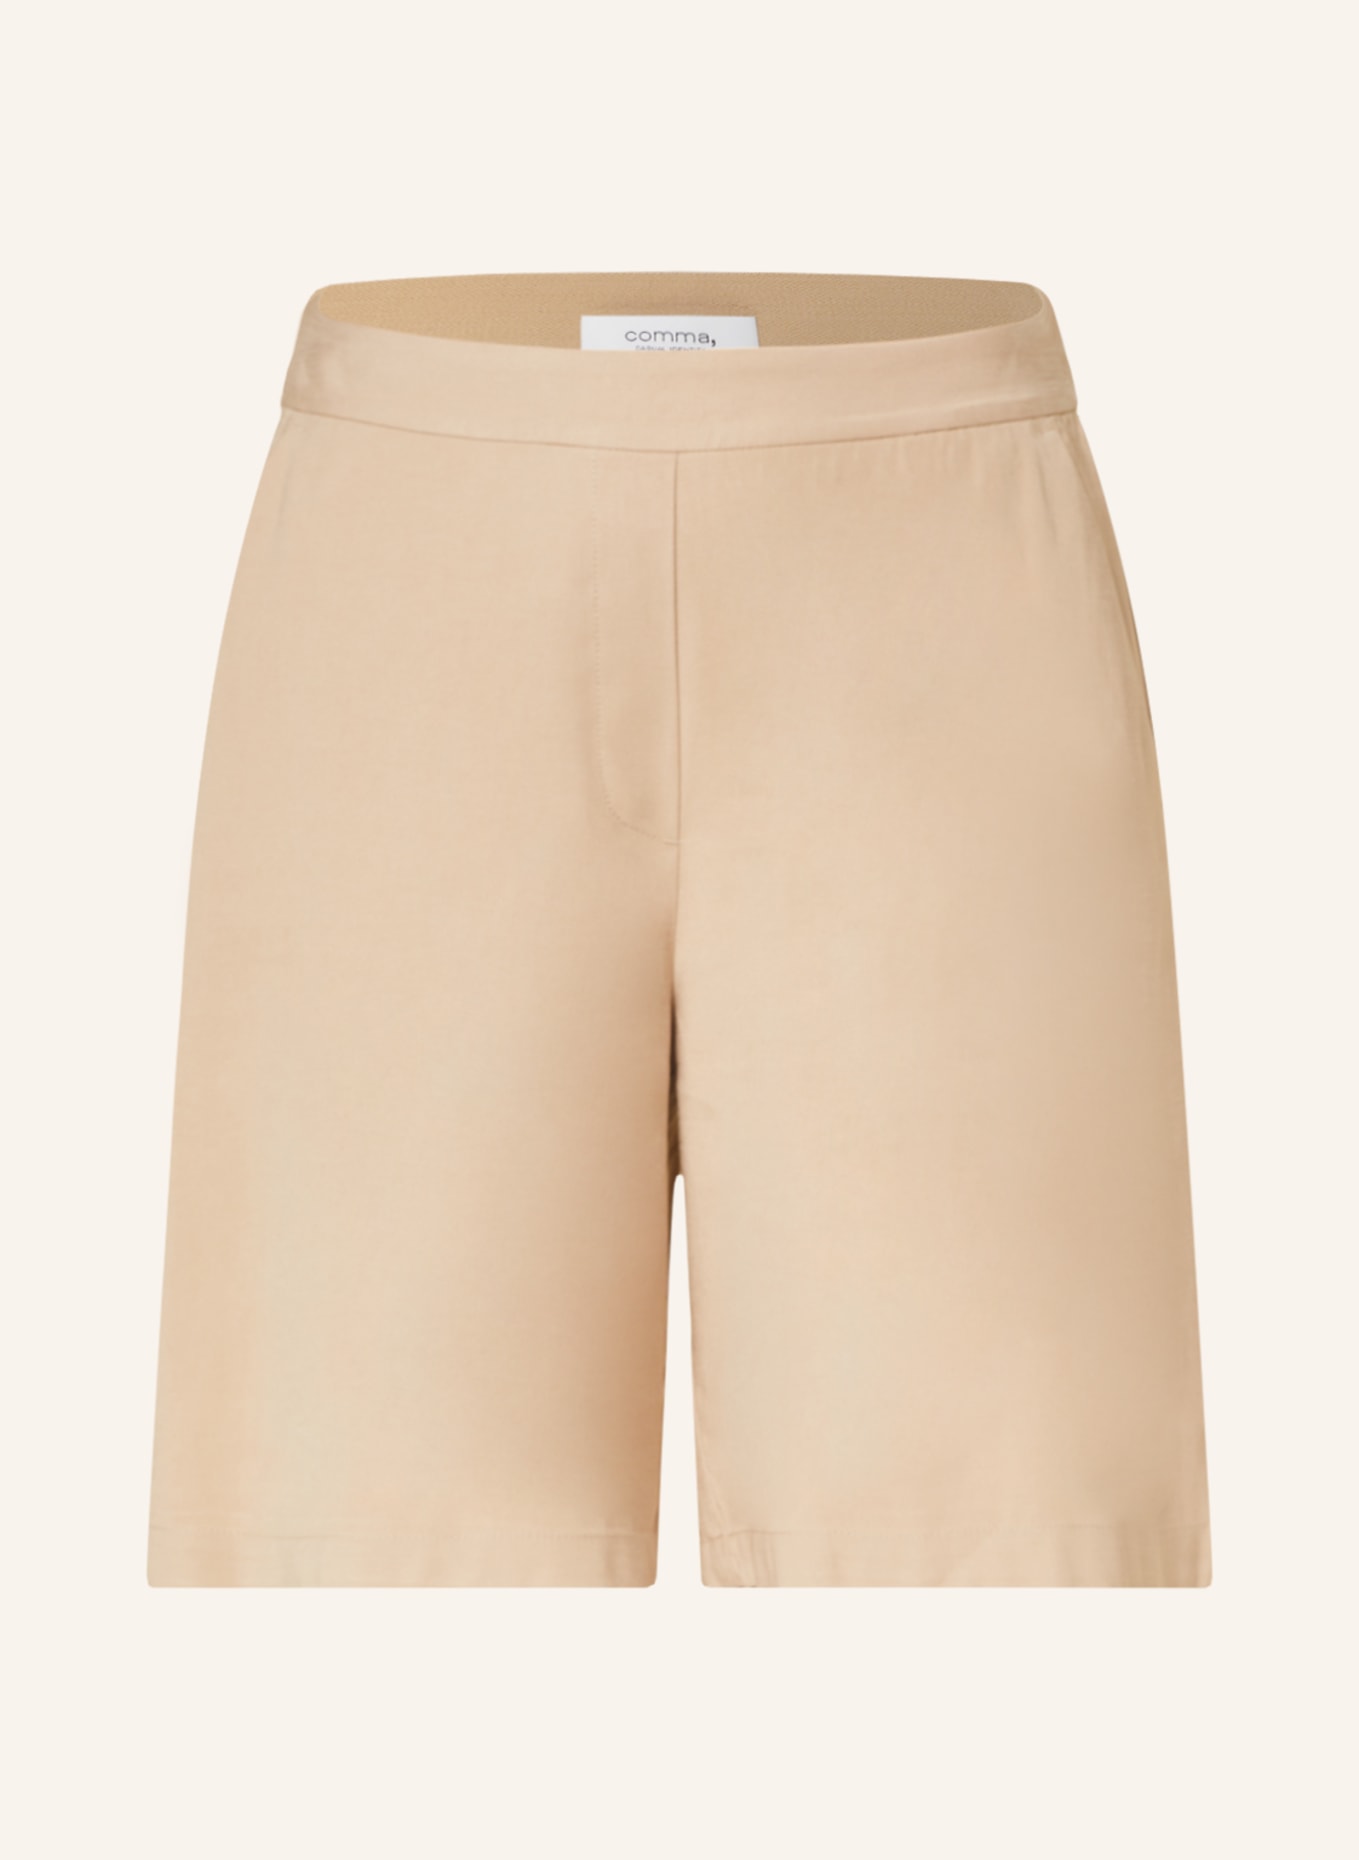 comma casual identity Shorts, Color: BEIGE (Image 1)